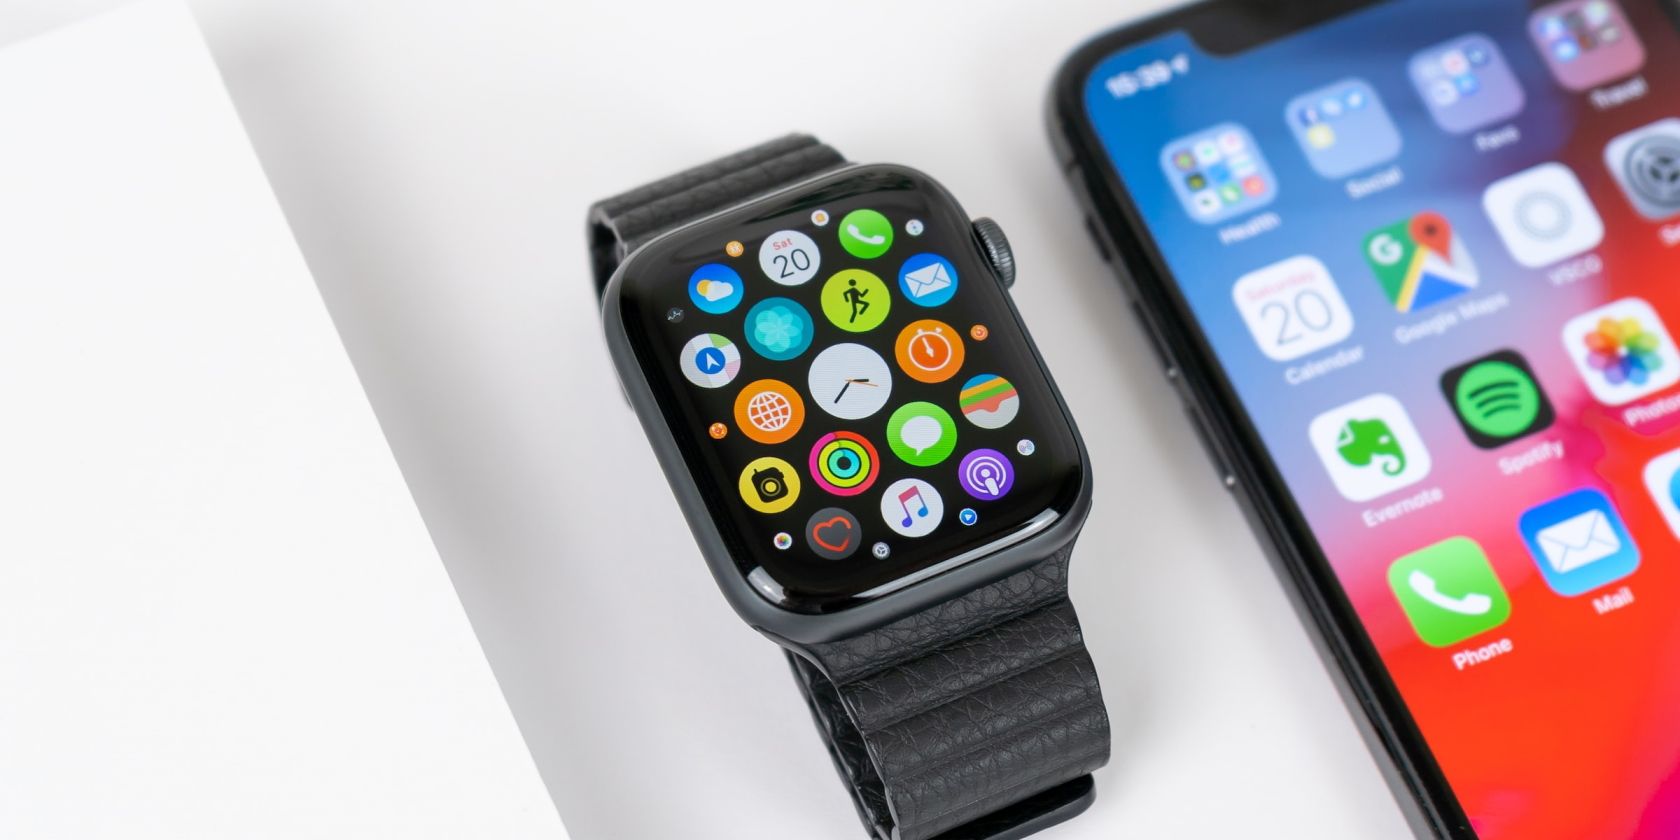 Stay fit with Apple Watch Ultra - Apple Support